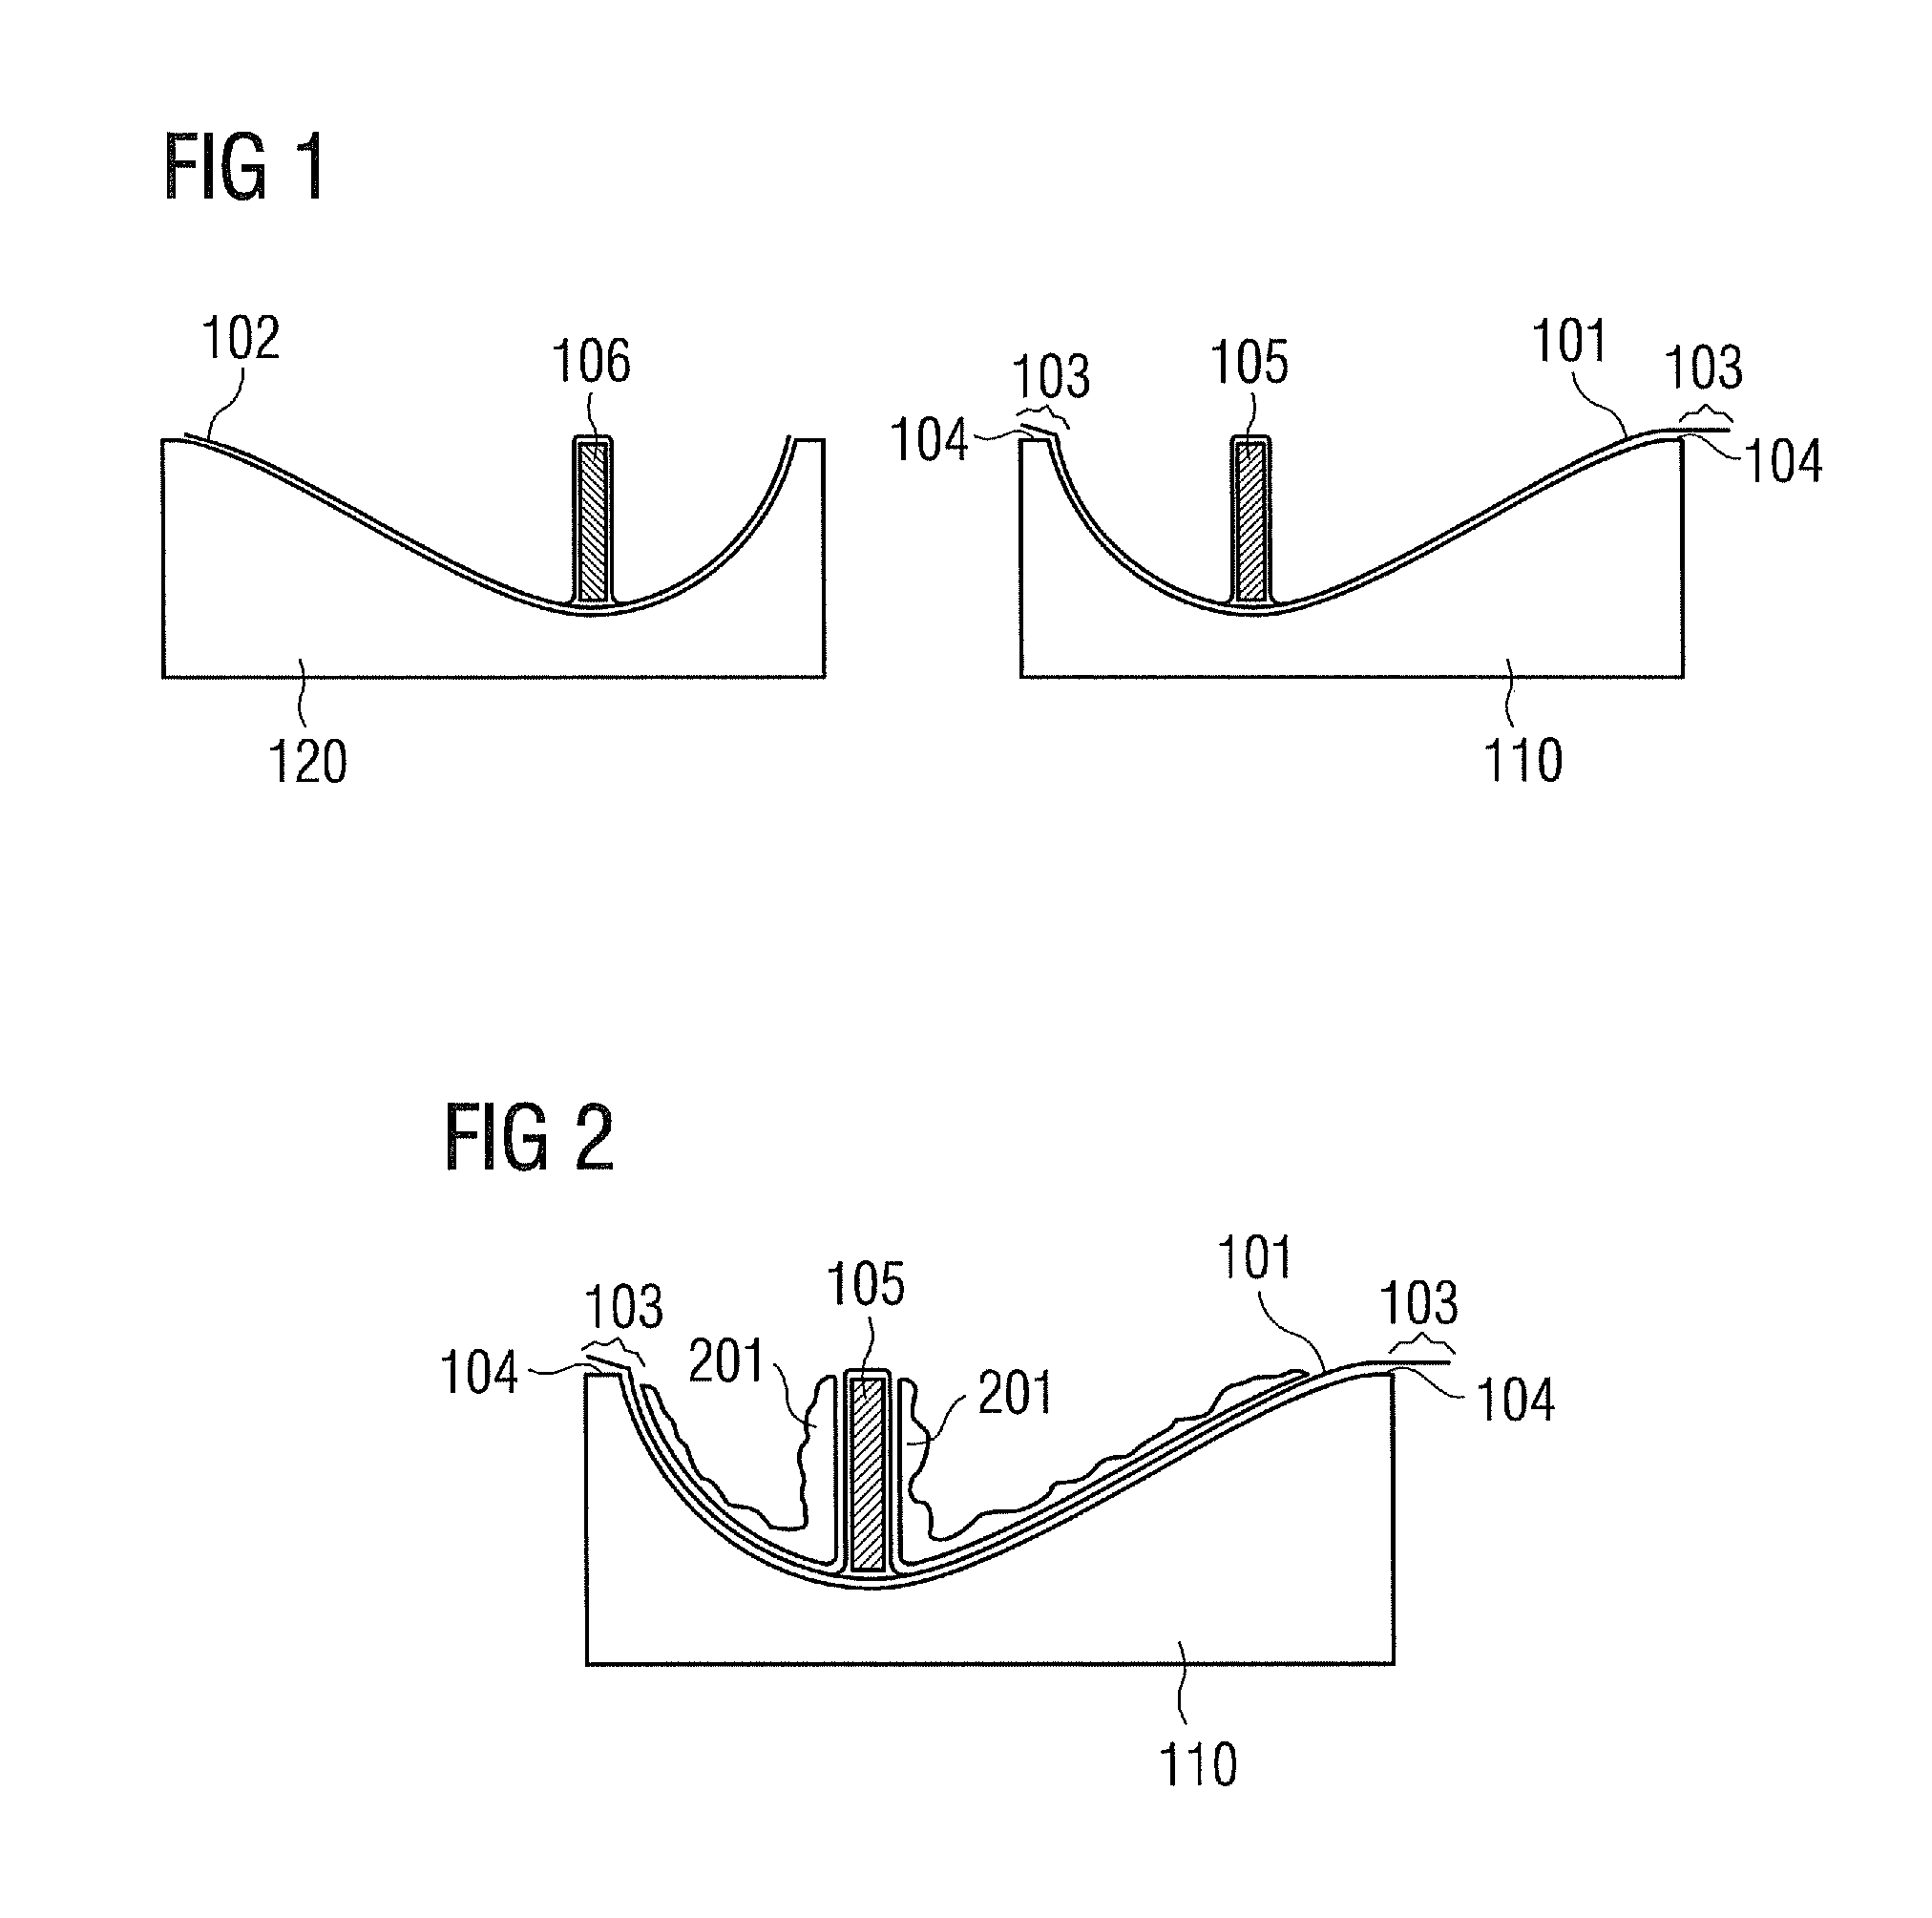 Method for manufacturing a wind turbine rotor blade